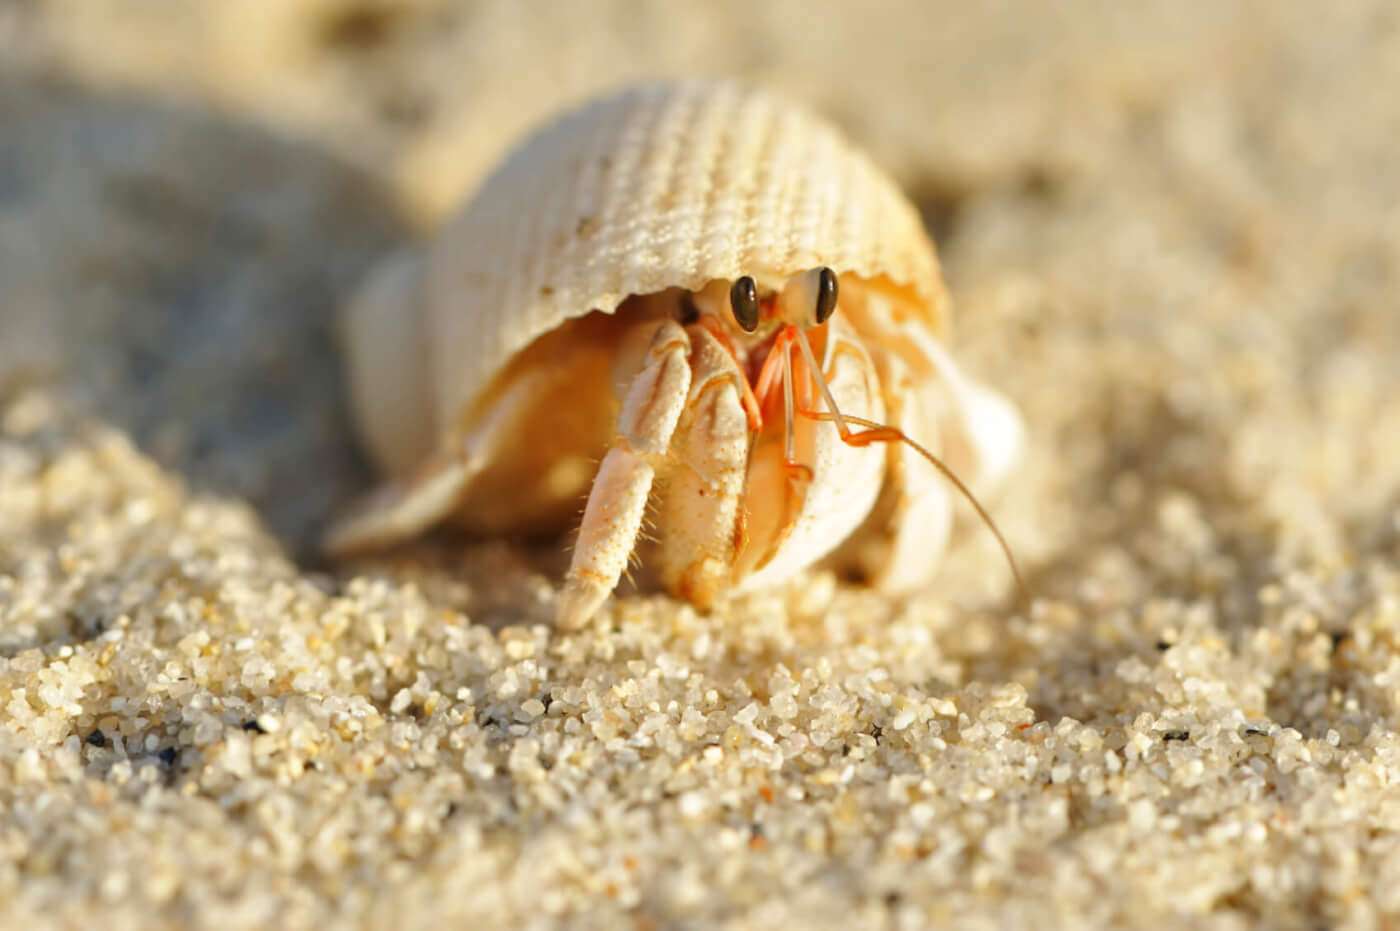 How To Take Care Of Hermit Crabs From The Beach